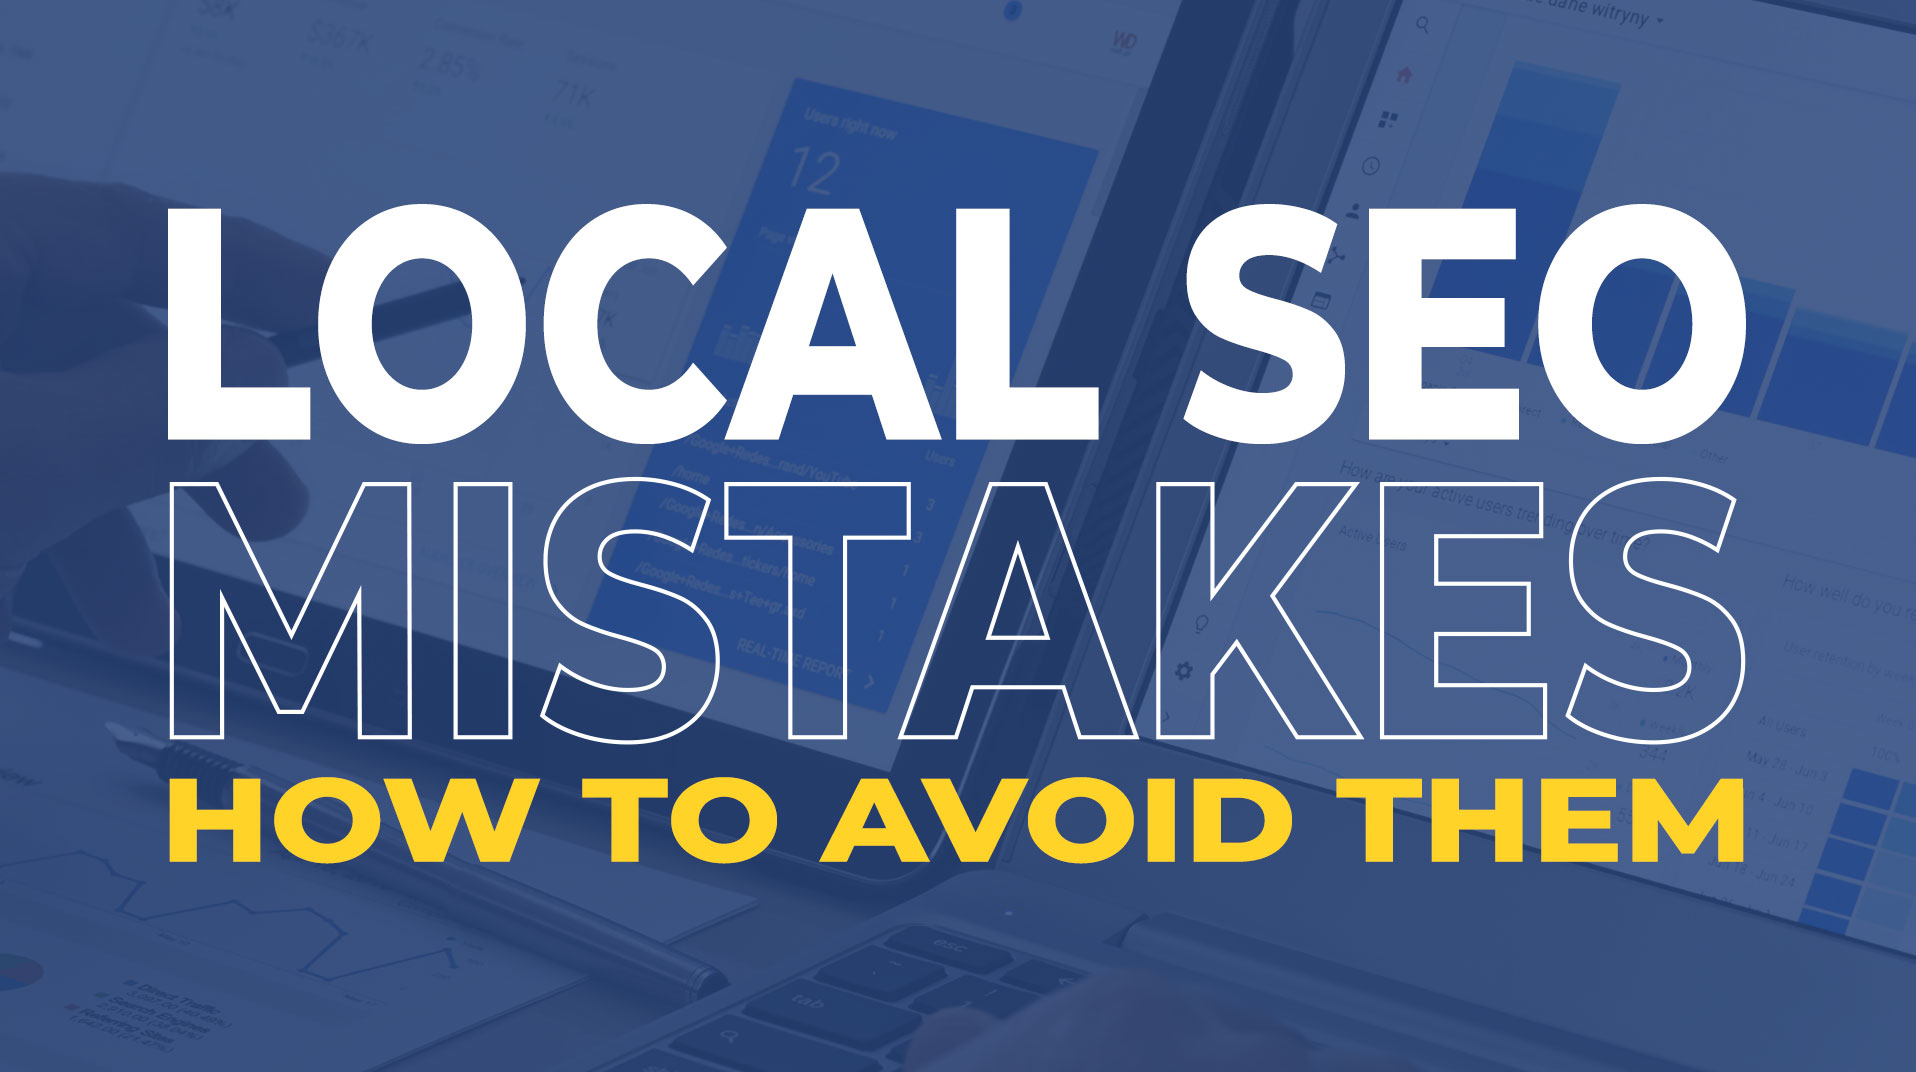 5 Common Local SEO Mistakes and How to Avoid Them